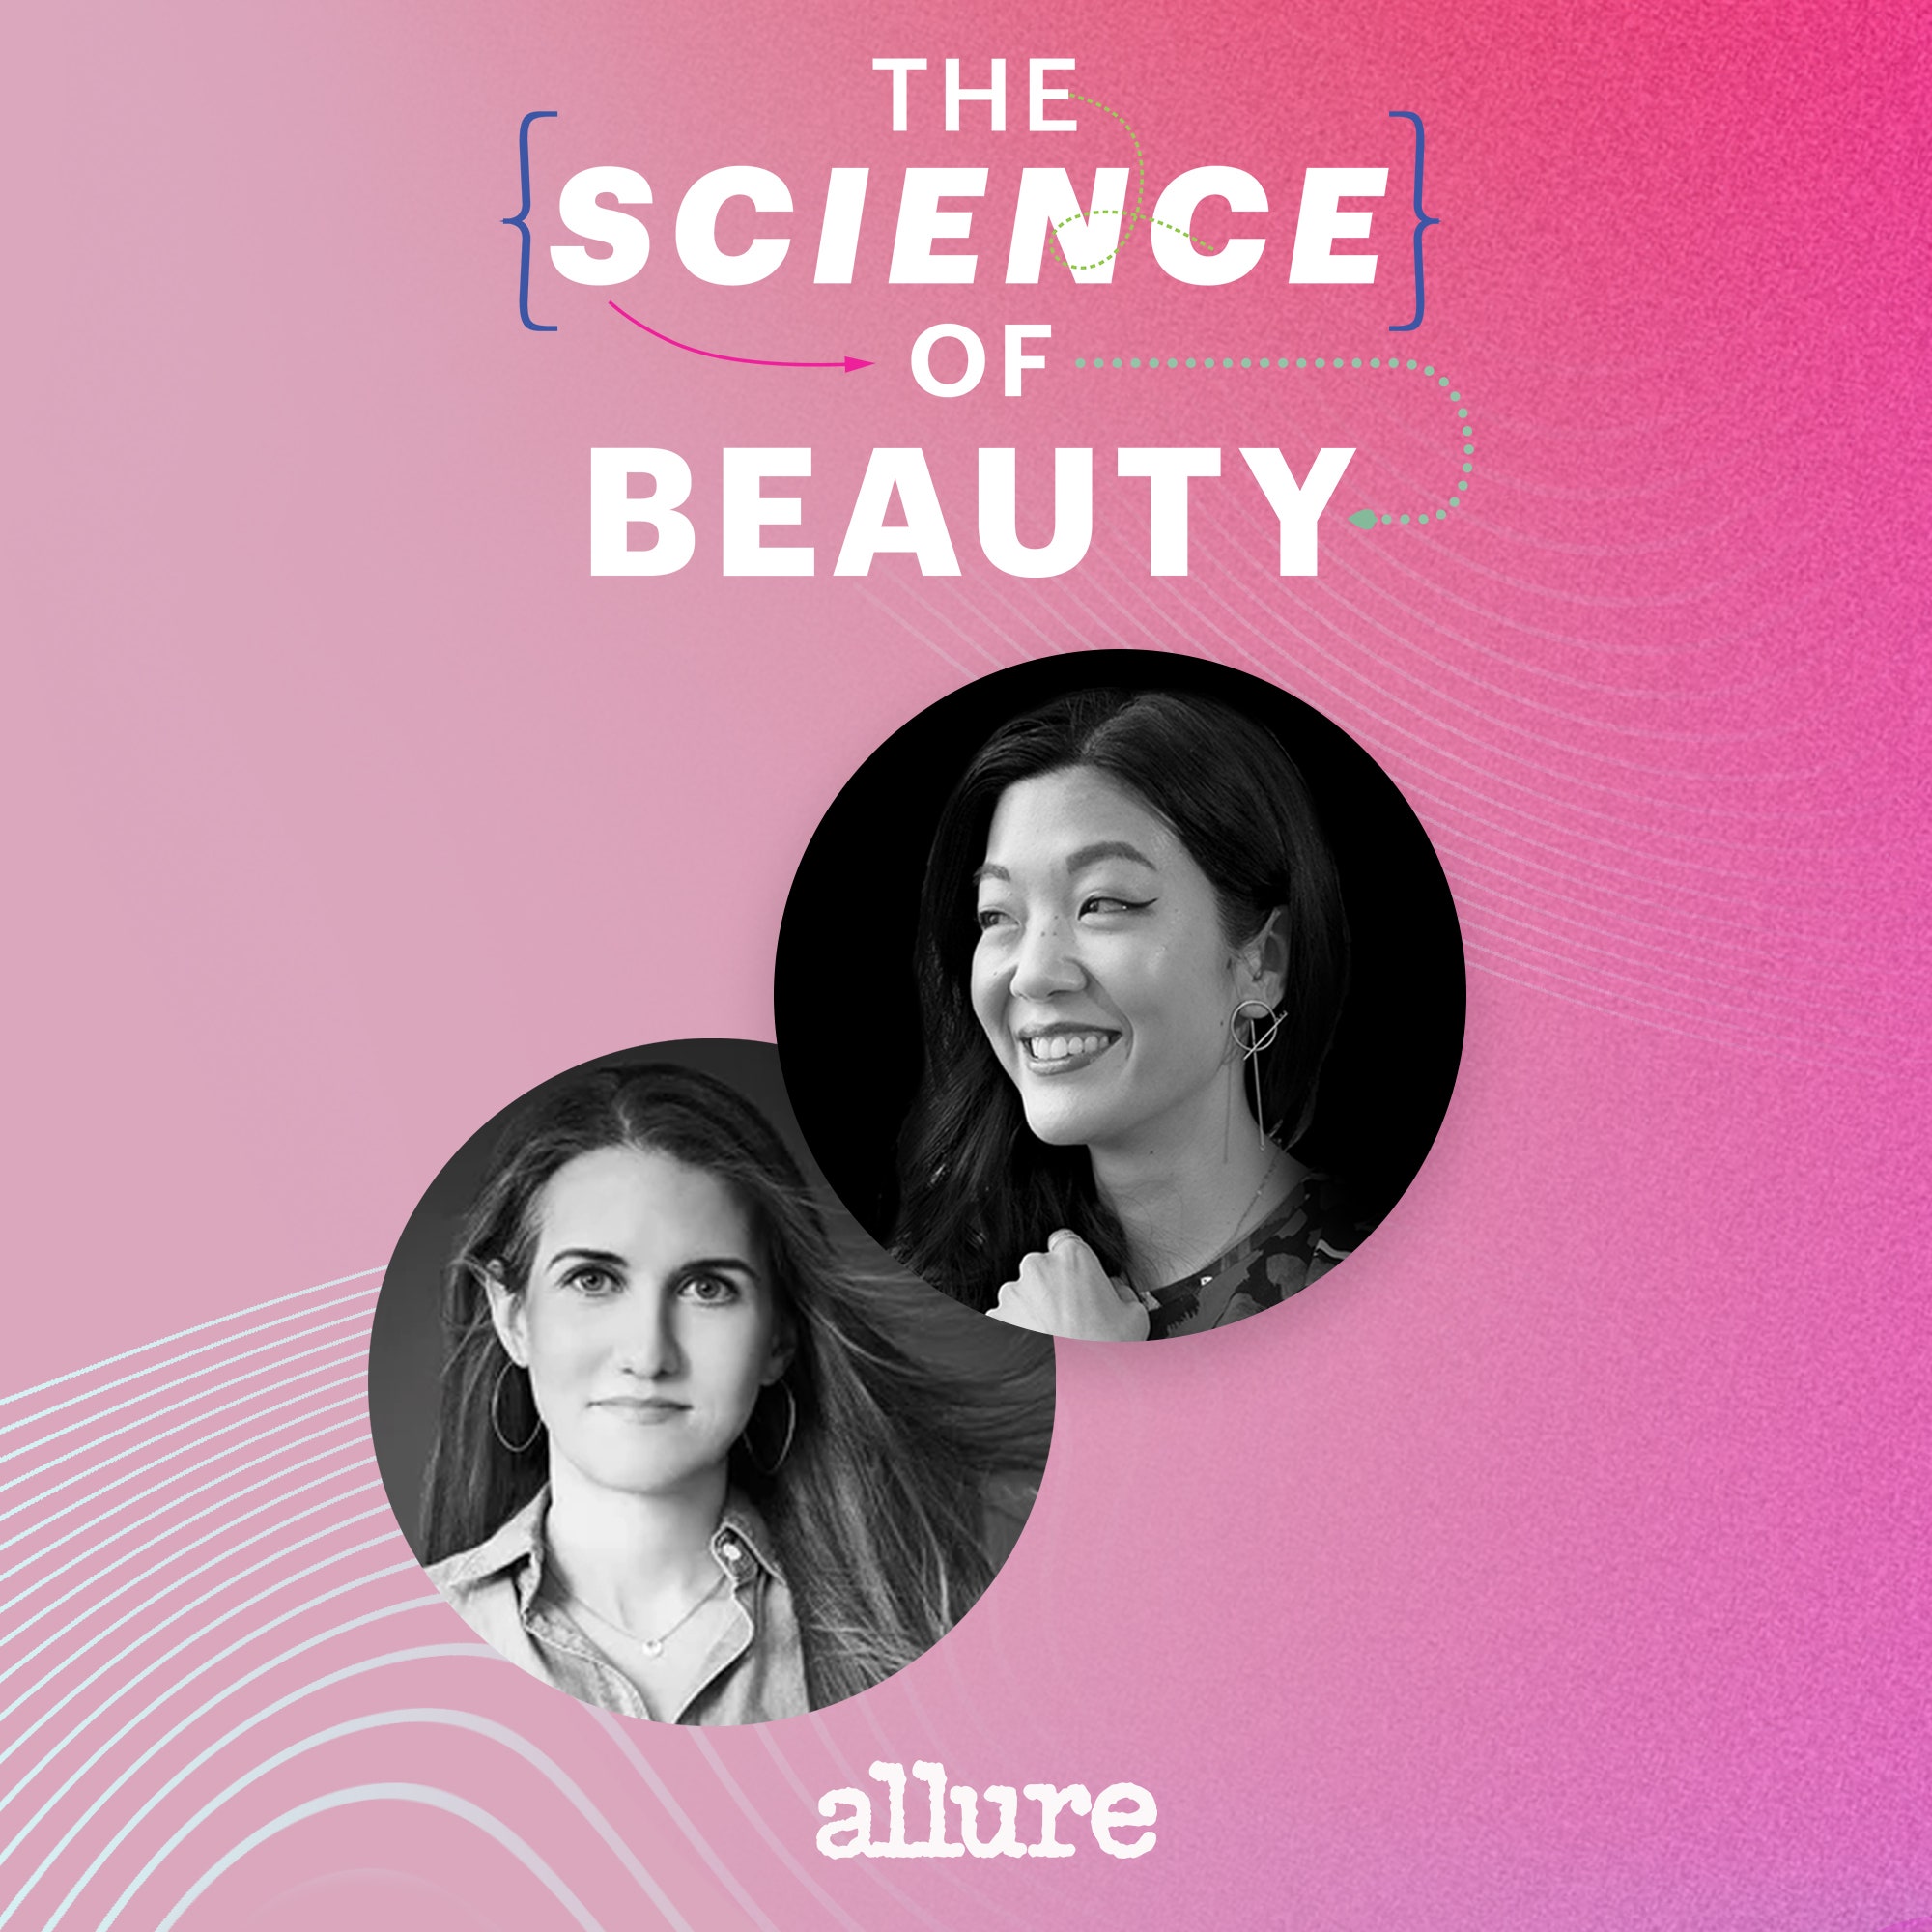 Listen to the Trailer for Allure's The Science of Beauty Podcast